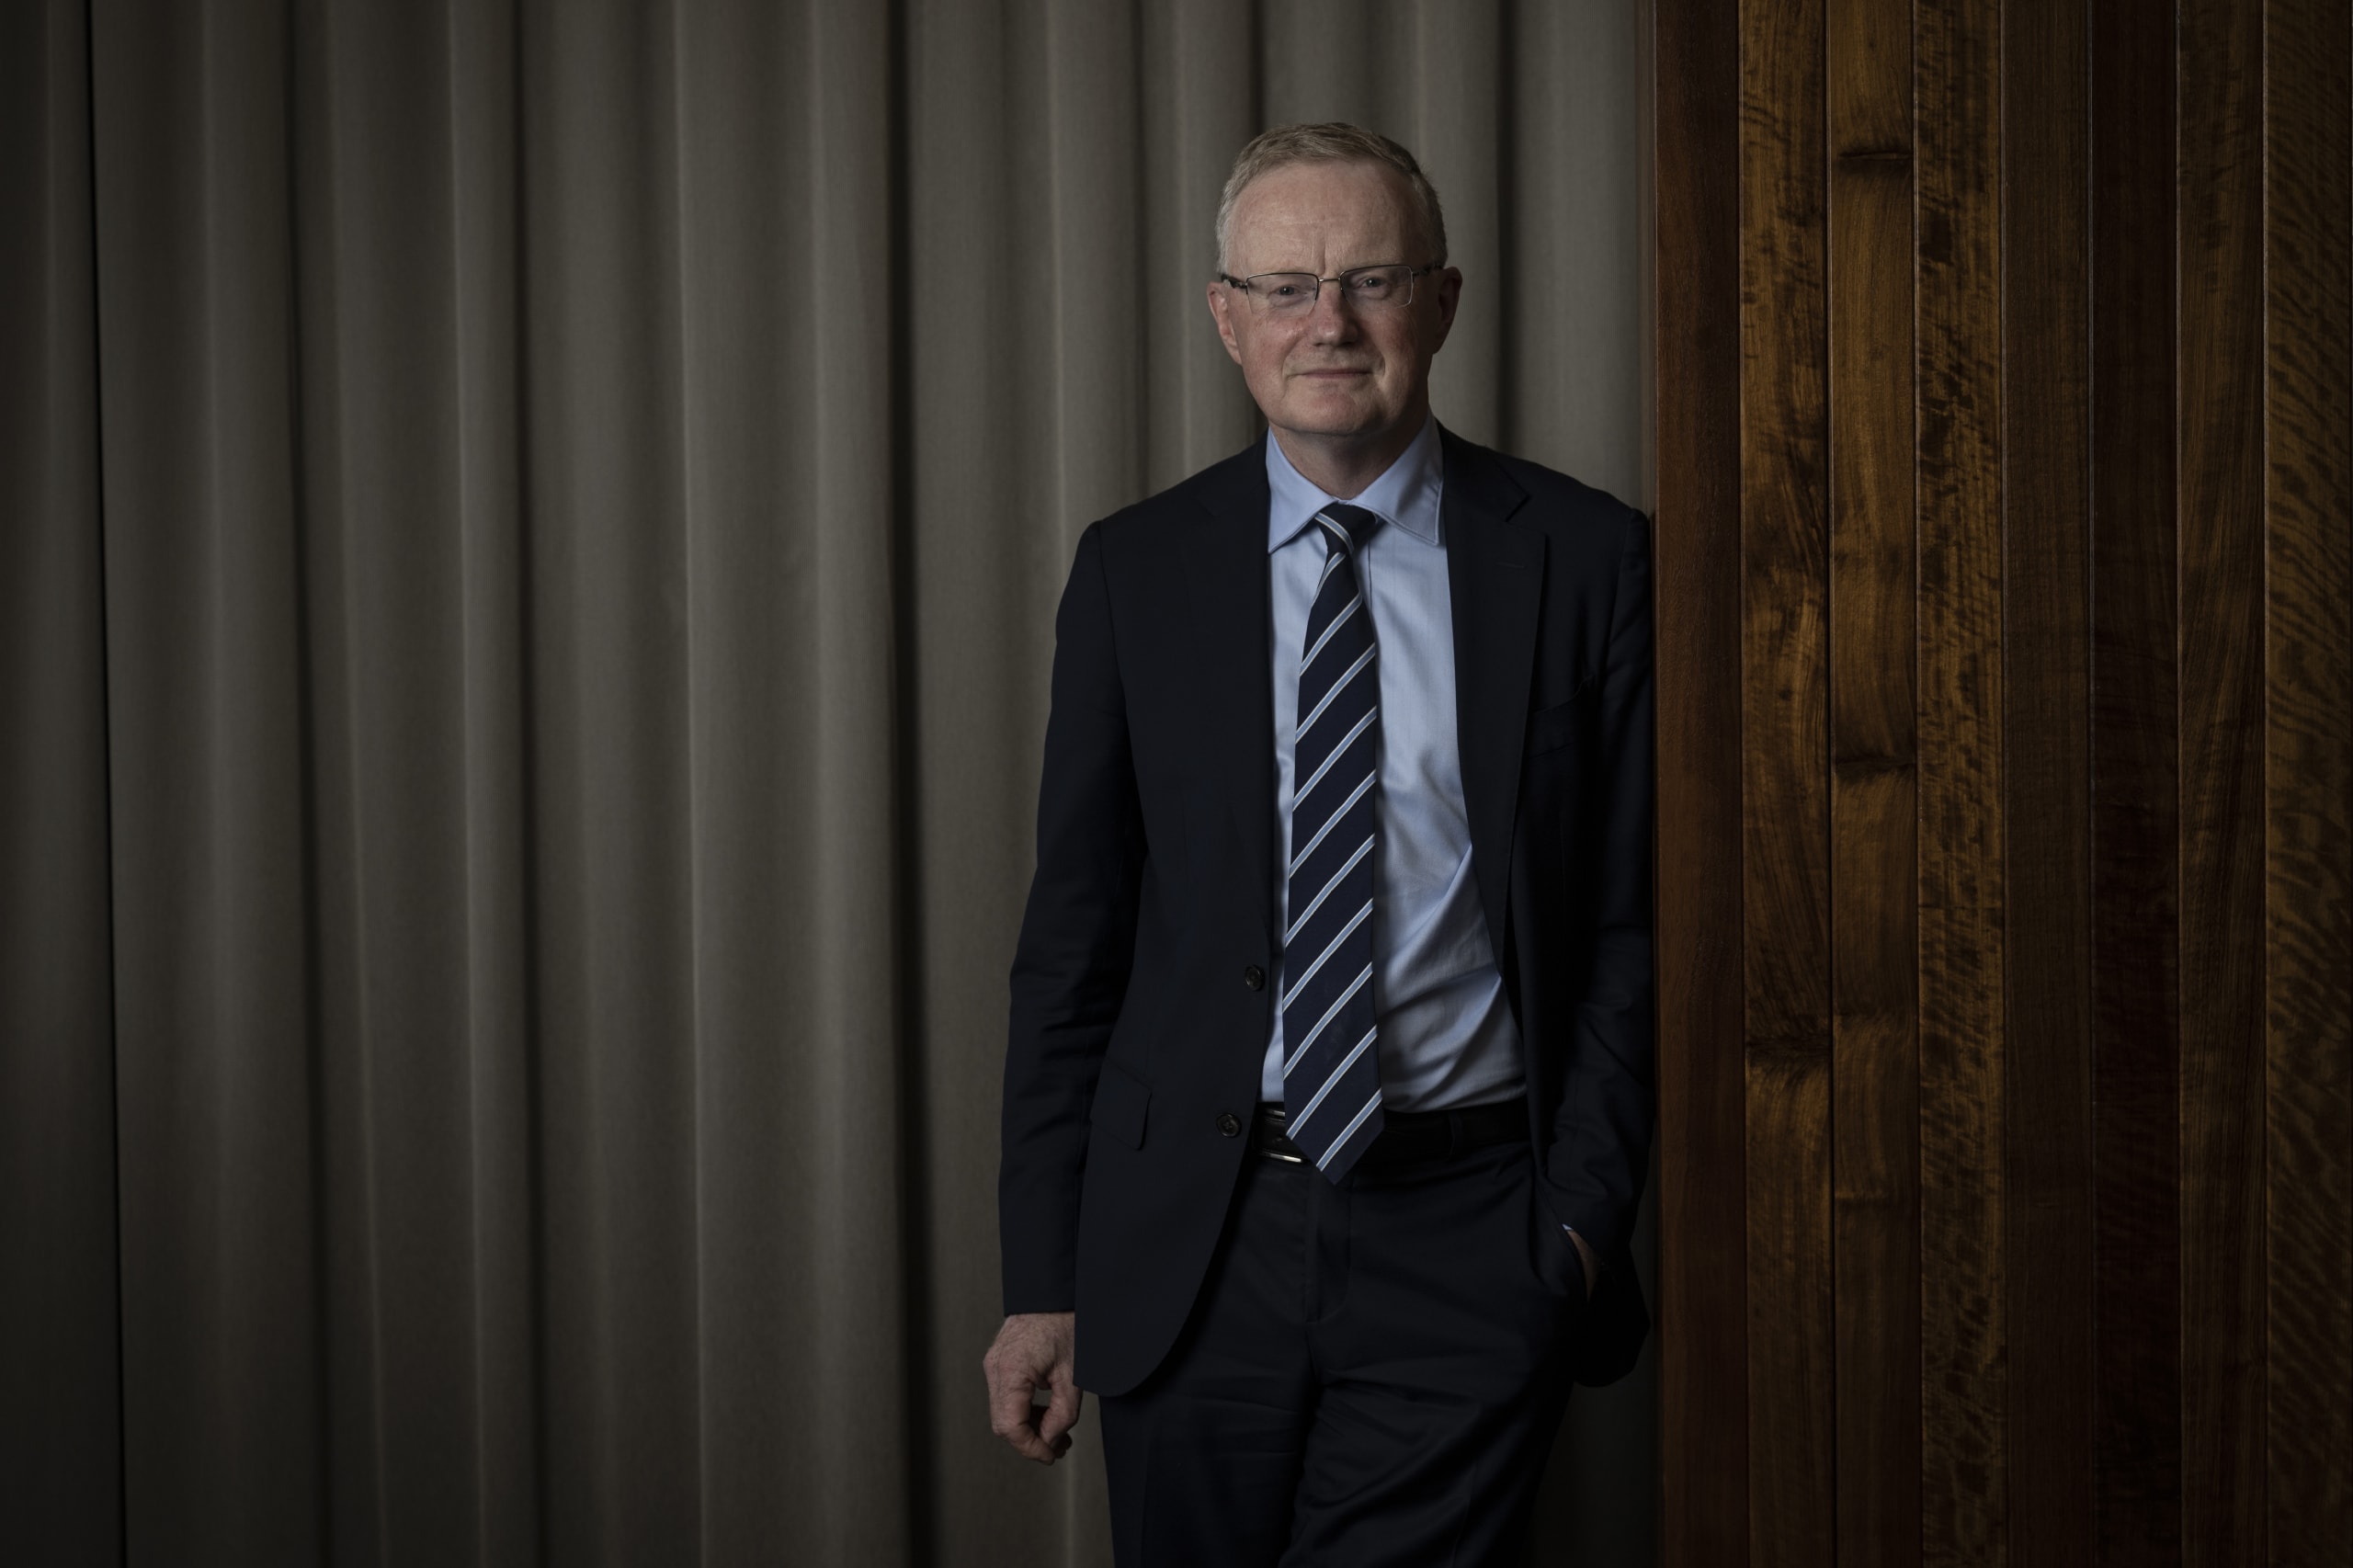 ‘Don’t blame us’: RBA governor defends painful rapid rate hikes, downplays role in property boom